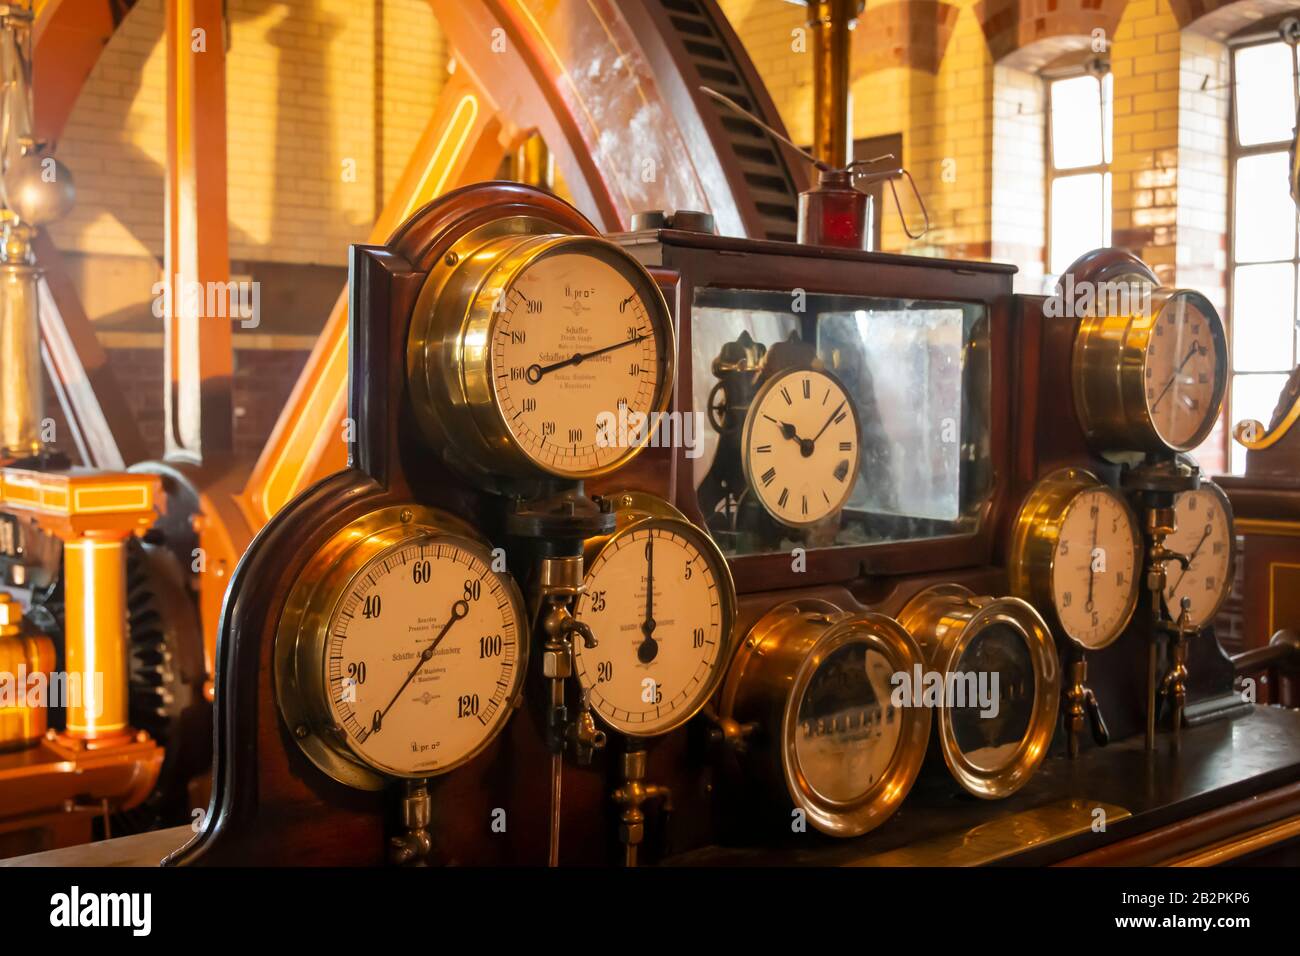 Measurement gauges and large flywheel at Abbey Pumping Station, a museum of science and technology in Leicester, England Stock Photo